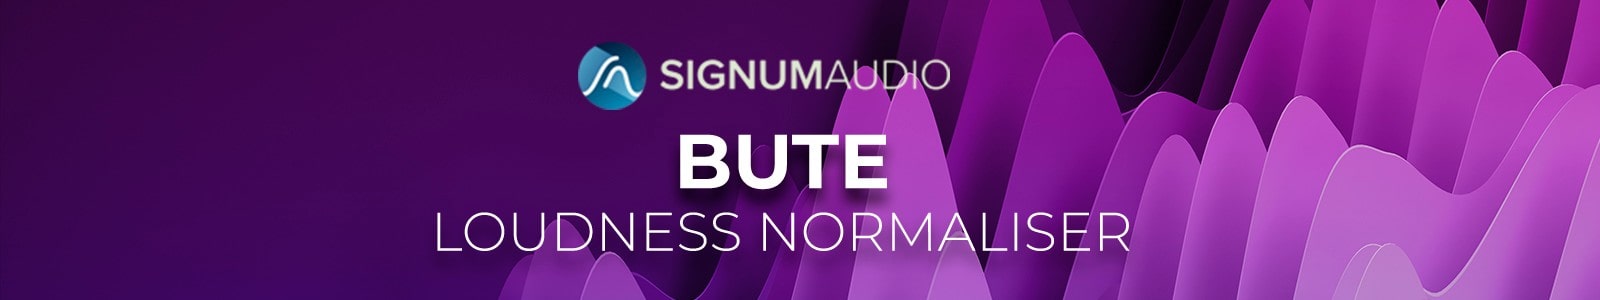 BUTE Loudness Normaliser by Signum Audio